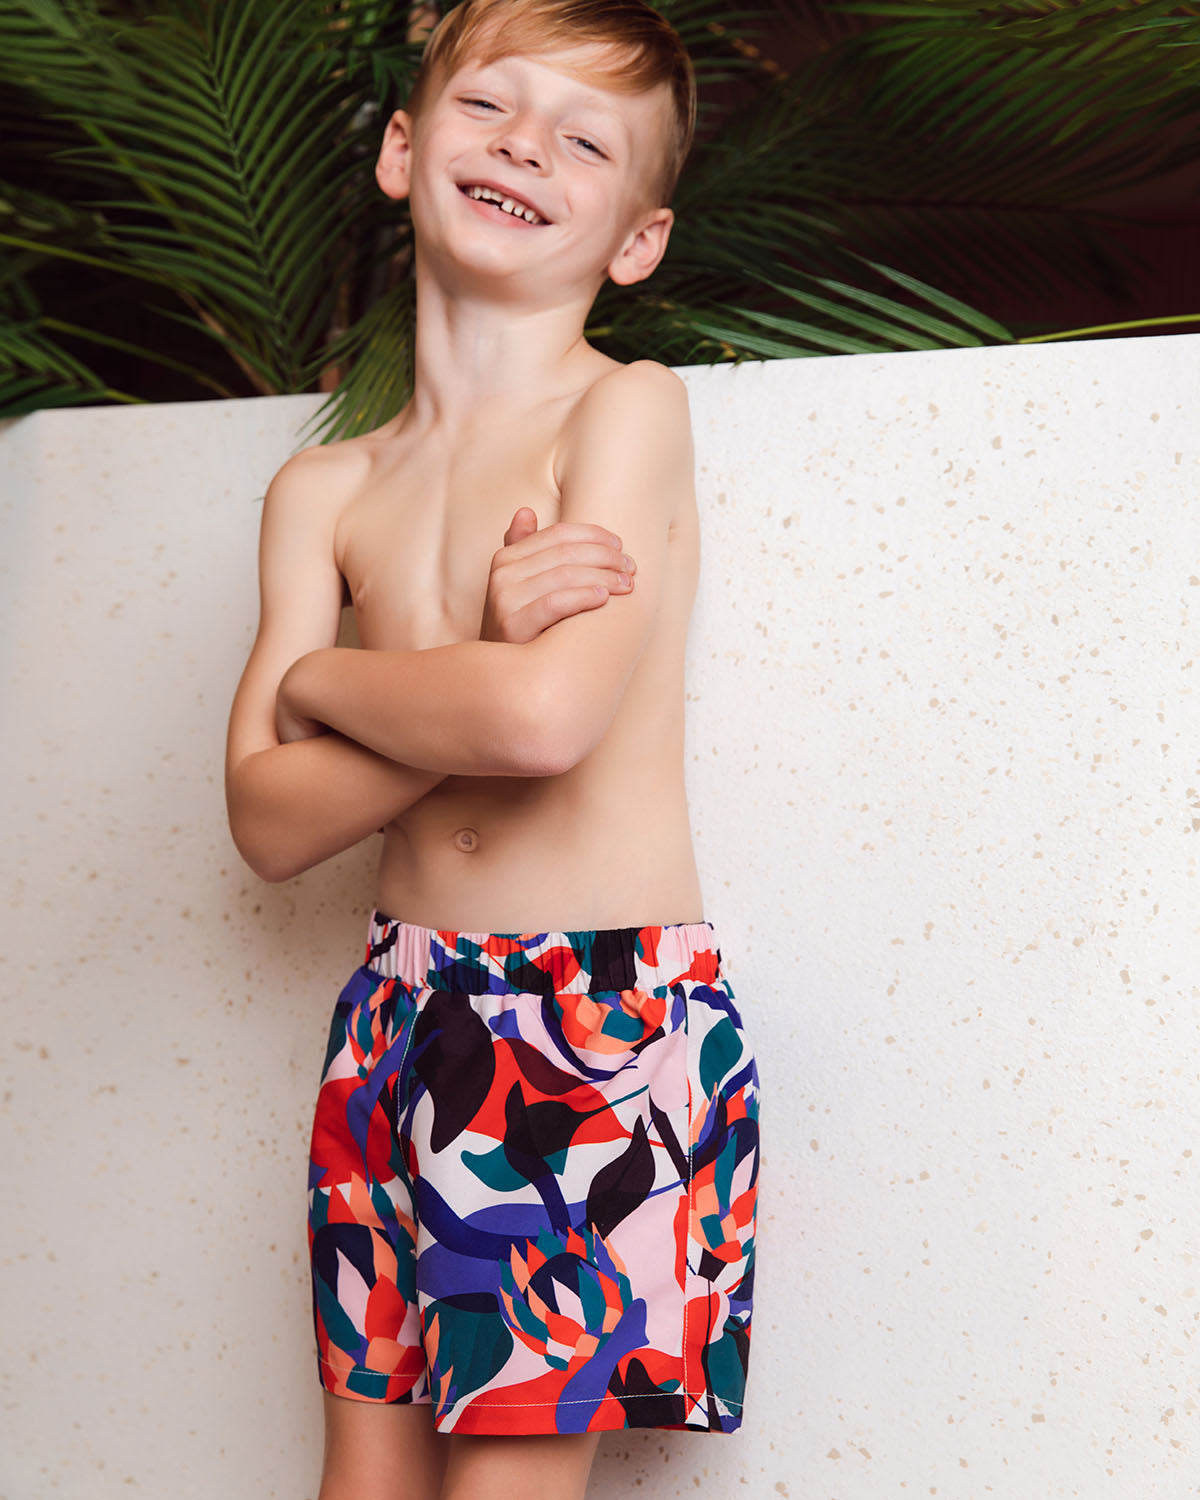 swim trunks coloring page